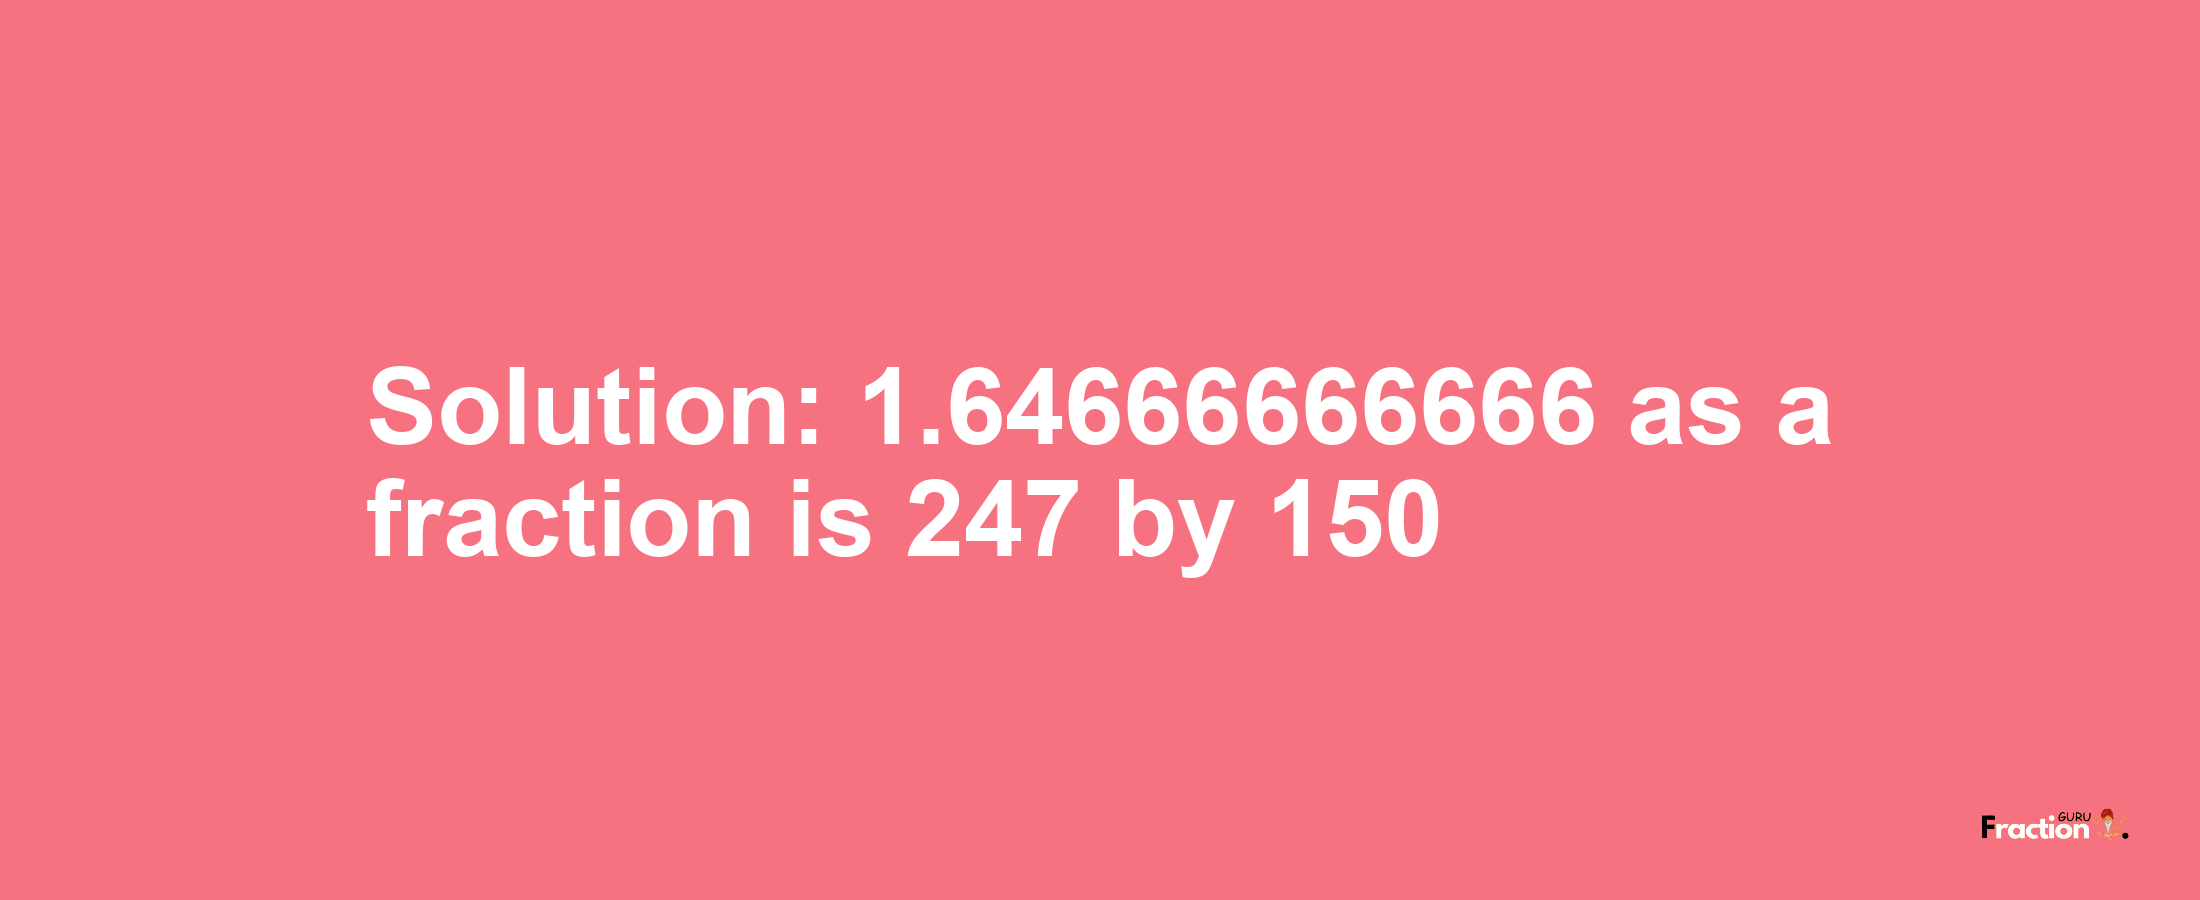 Solution:1.64666666666 as a fraction is 247/150